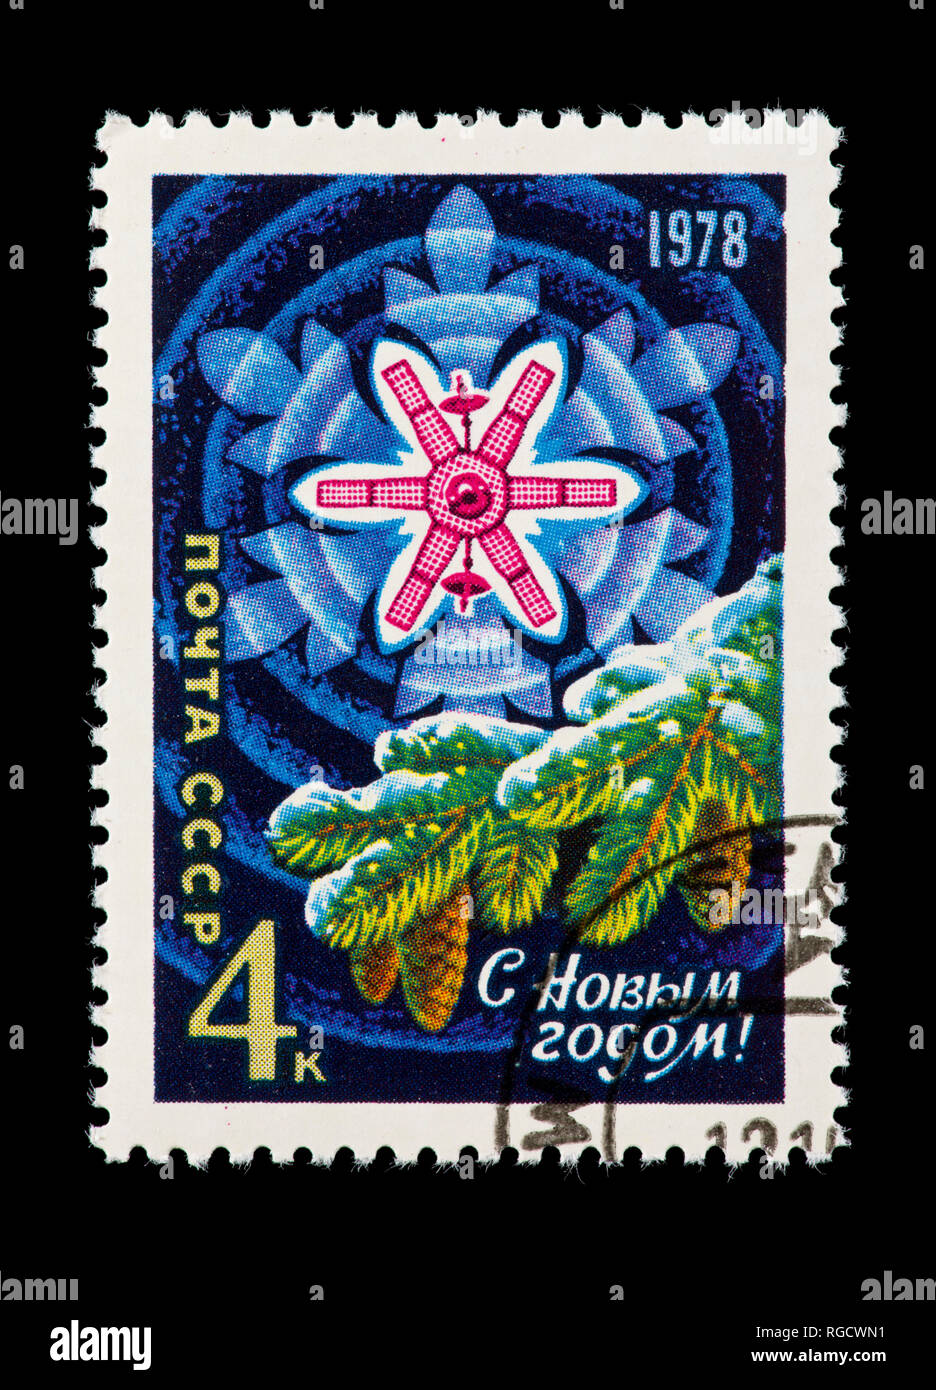 Postage stamp from the Soviet Union depicting fir, snowflake and Molniya satellite, issued for New Year;s. Stock Photo